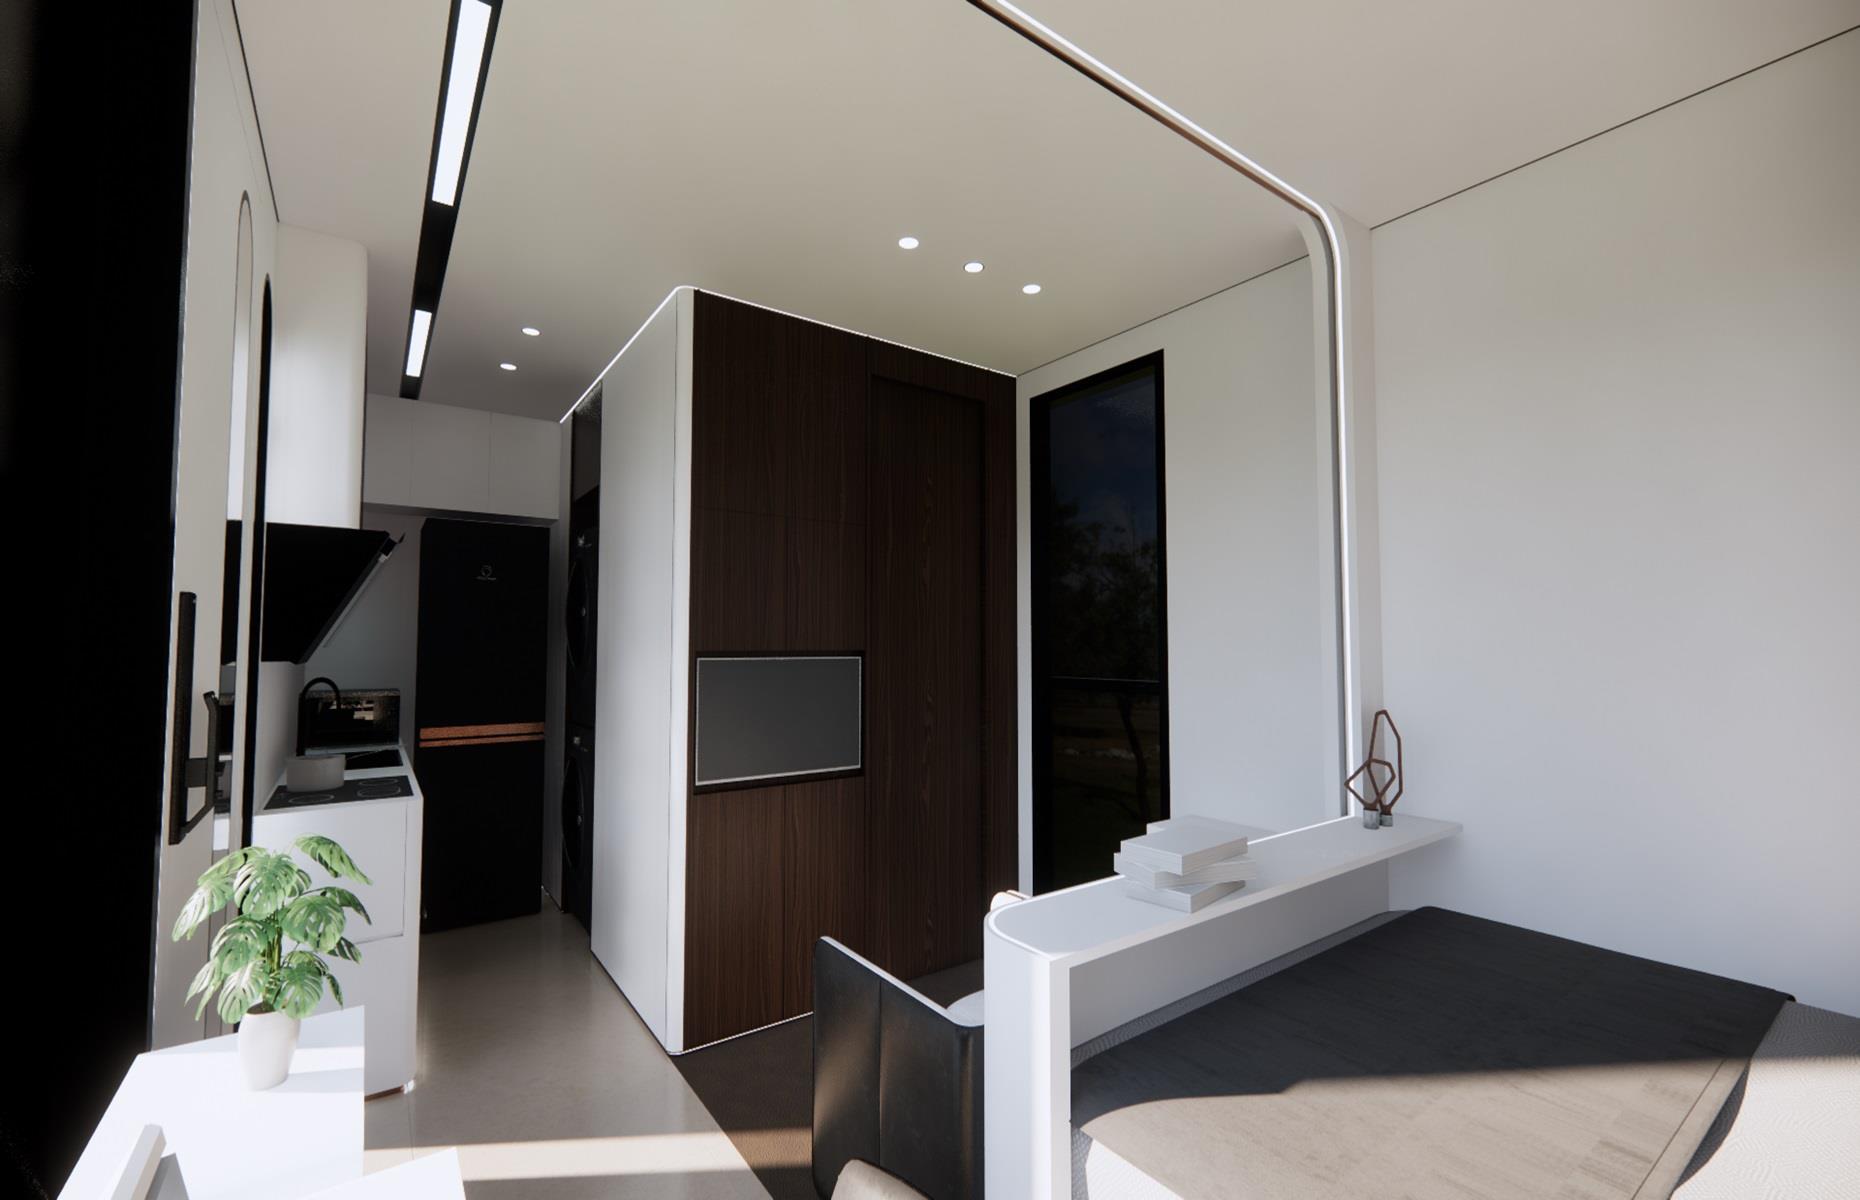 <p>Formed from 90% recyclable construction materials, Cube One is pollution and emission-free. Plus, thanks to its design, it’s also termite resistant. Rooftop solar panels power the home, while its foundation-free construction means it will have minimal impact on the environment.</p>  <p>All units are built-to-order so can be made compliable with any local regulations and can be delivered anywhere in the world.</p>